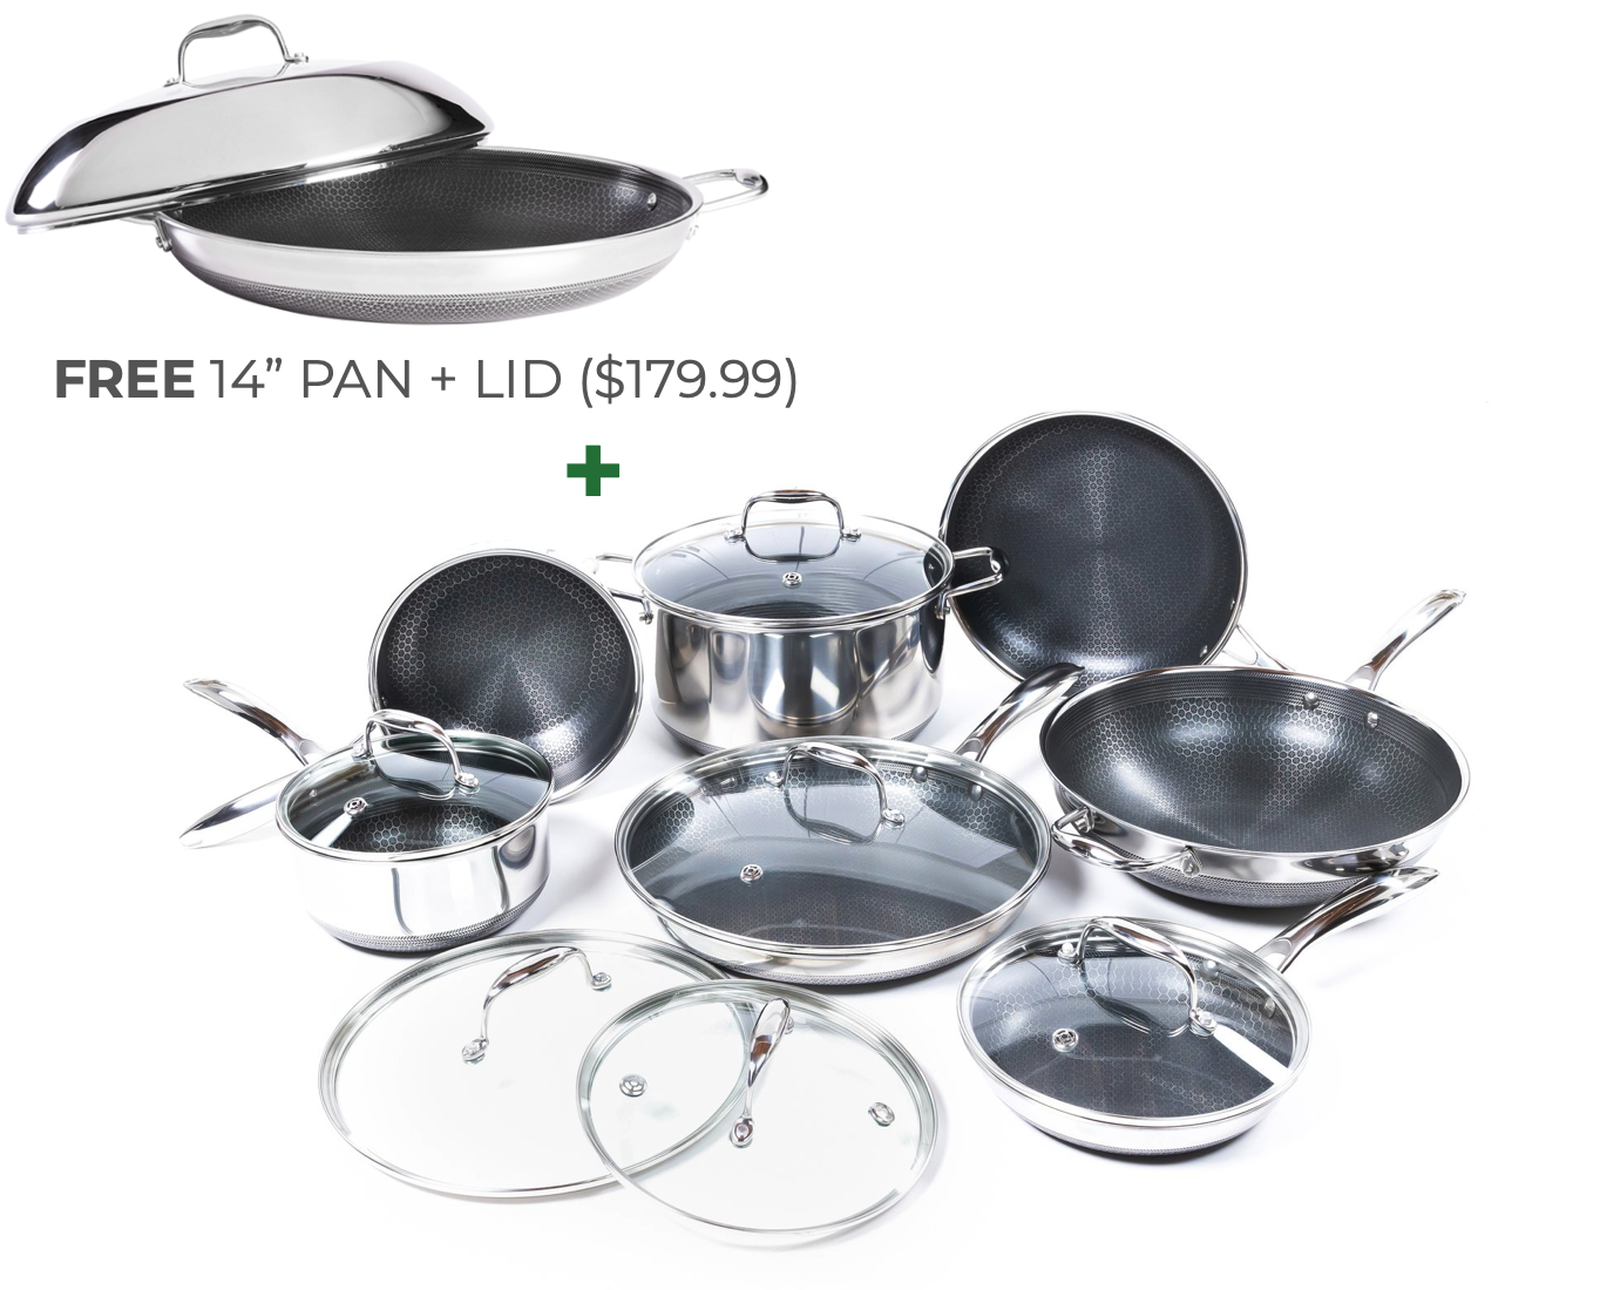 HexClad: NEW! Buy Our 13PC Set & Get a 14 Pan + Lid FREE!